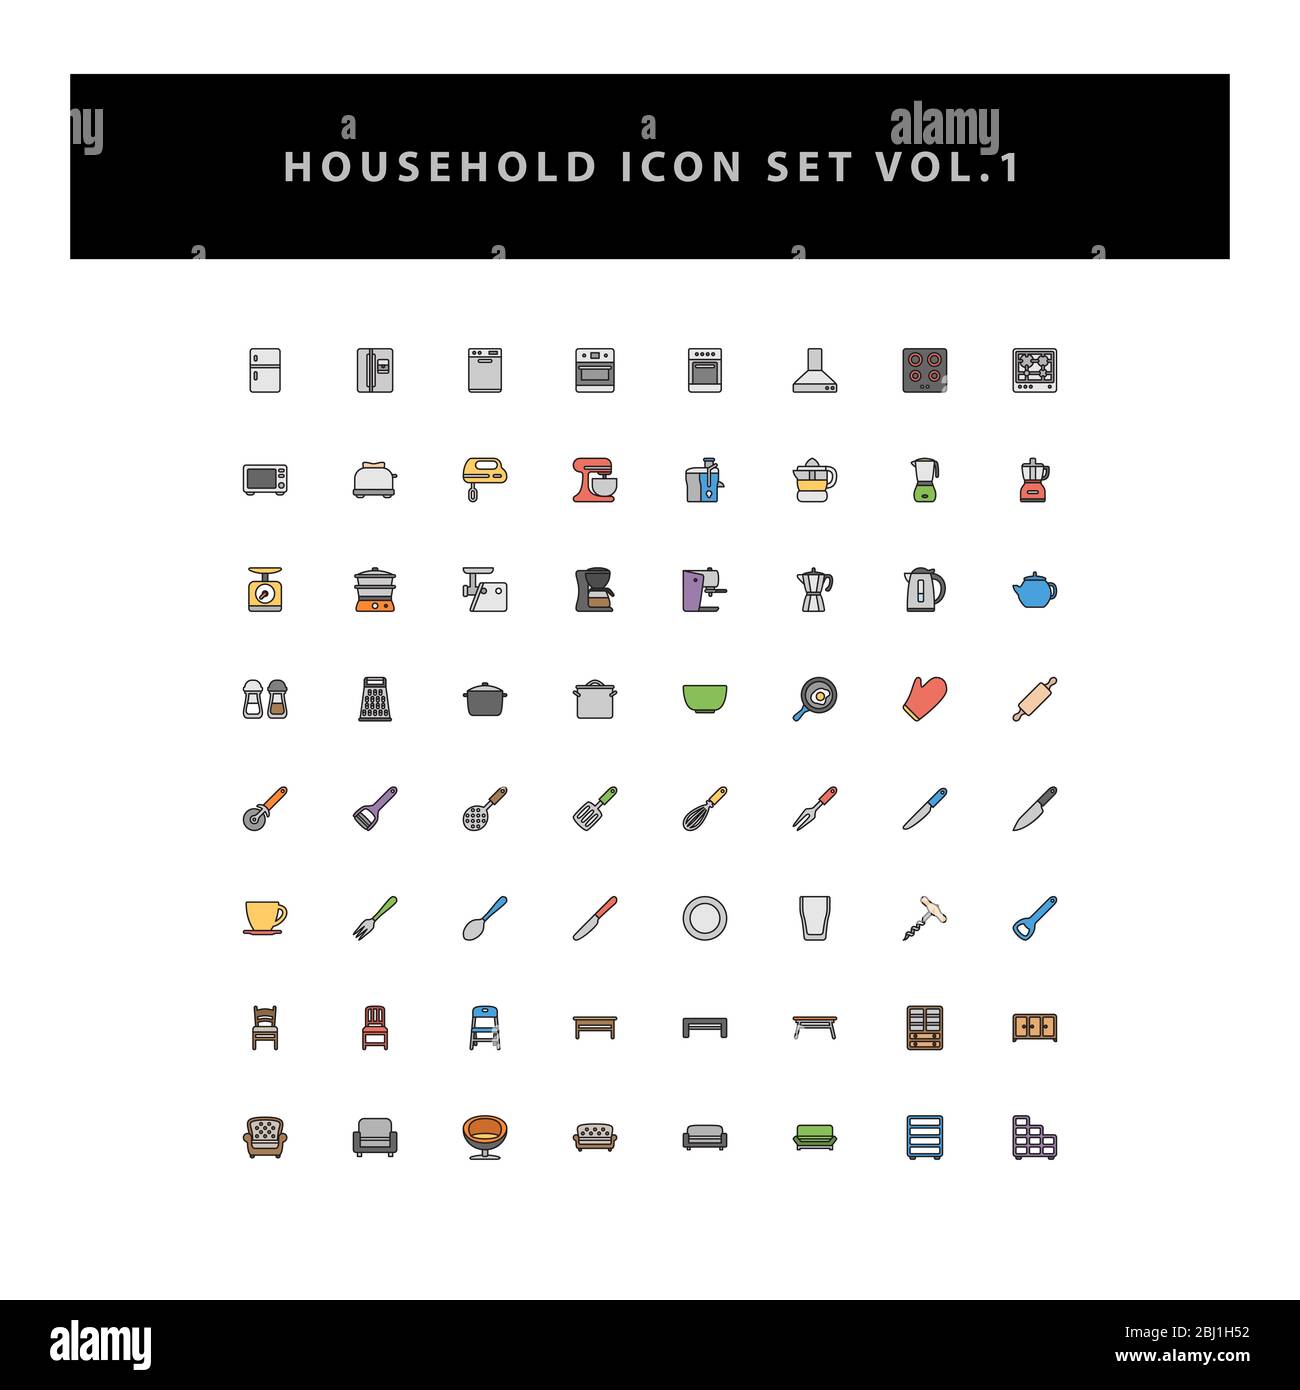 household appliances vector icons set vol 1 with filled outline style design Stock Vector